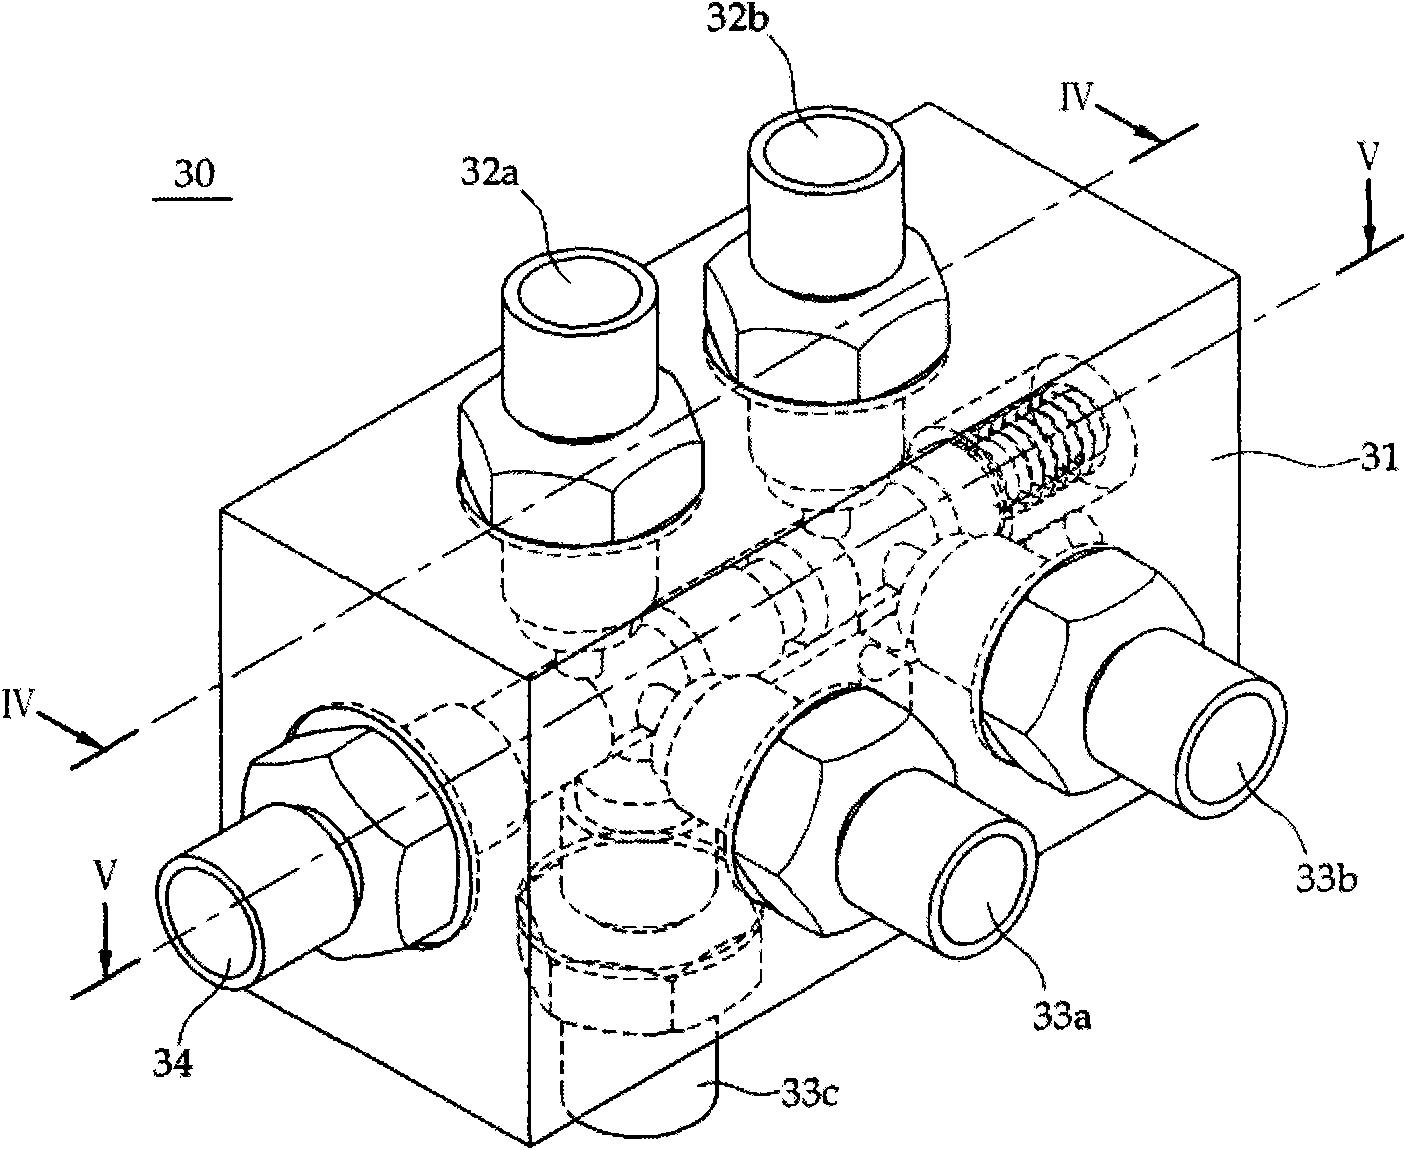 Valve for controlling hydraulic pump of construction machinery